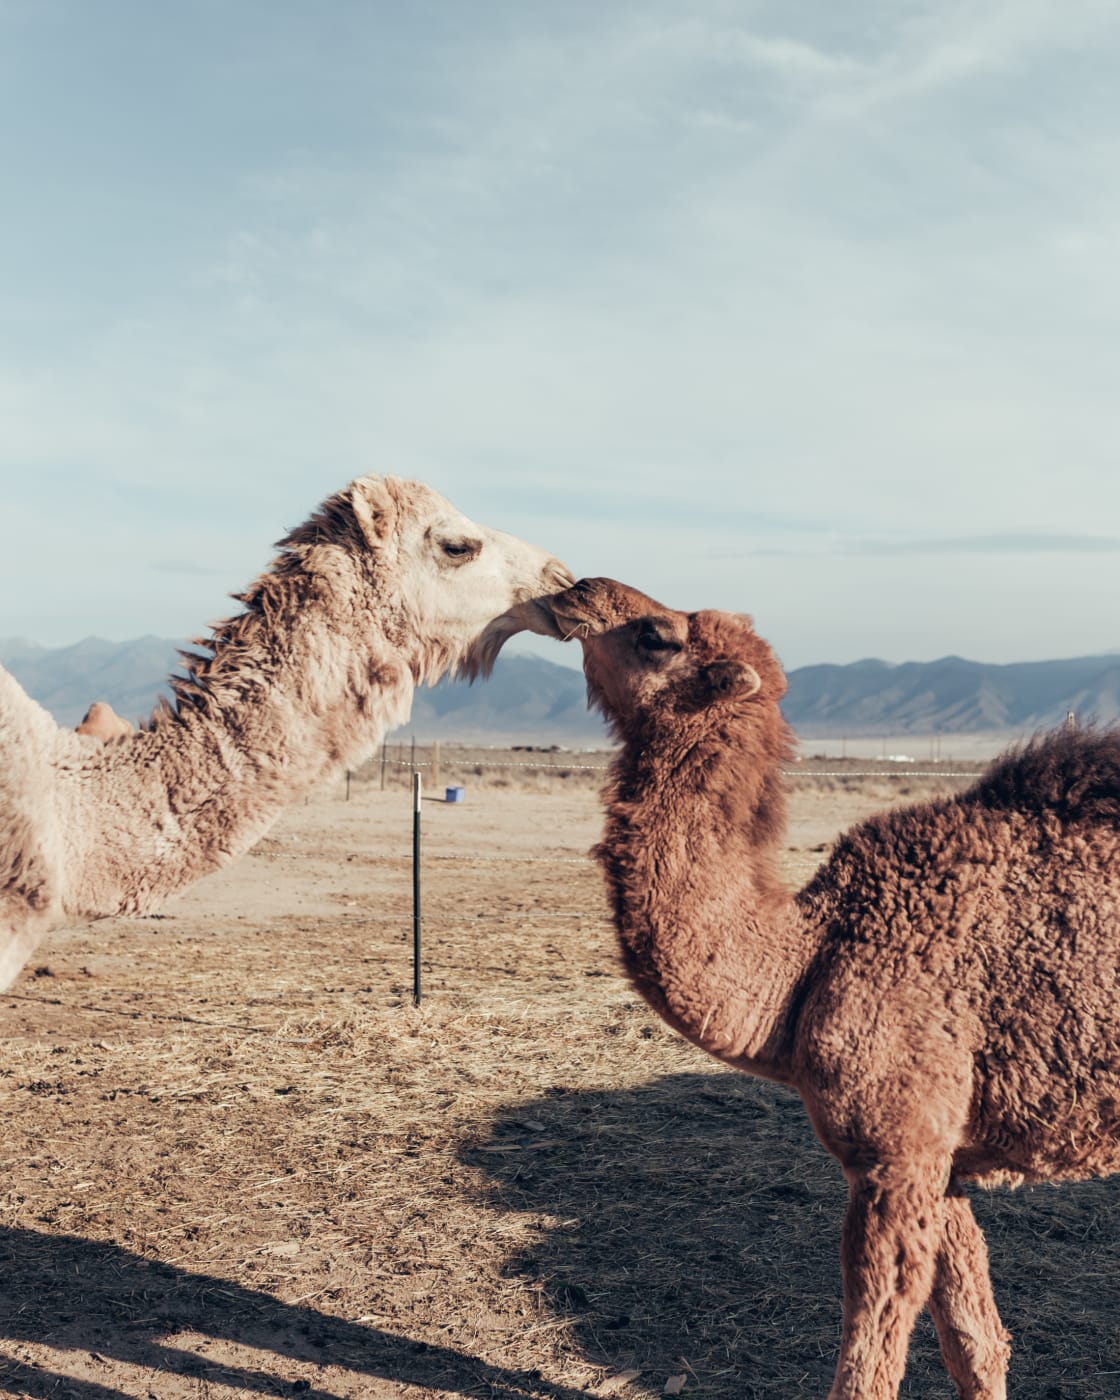 Watching camels play is so much fun- you can't wipe the smile from your face. 